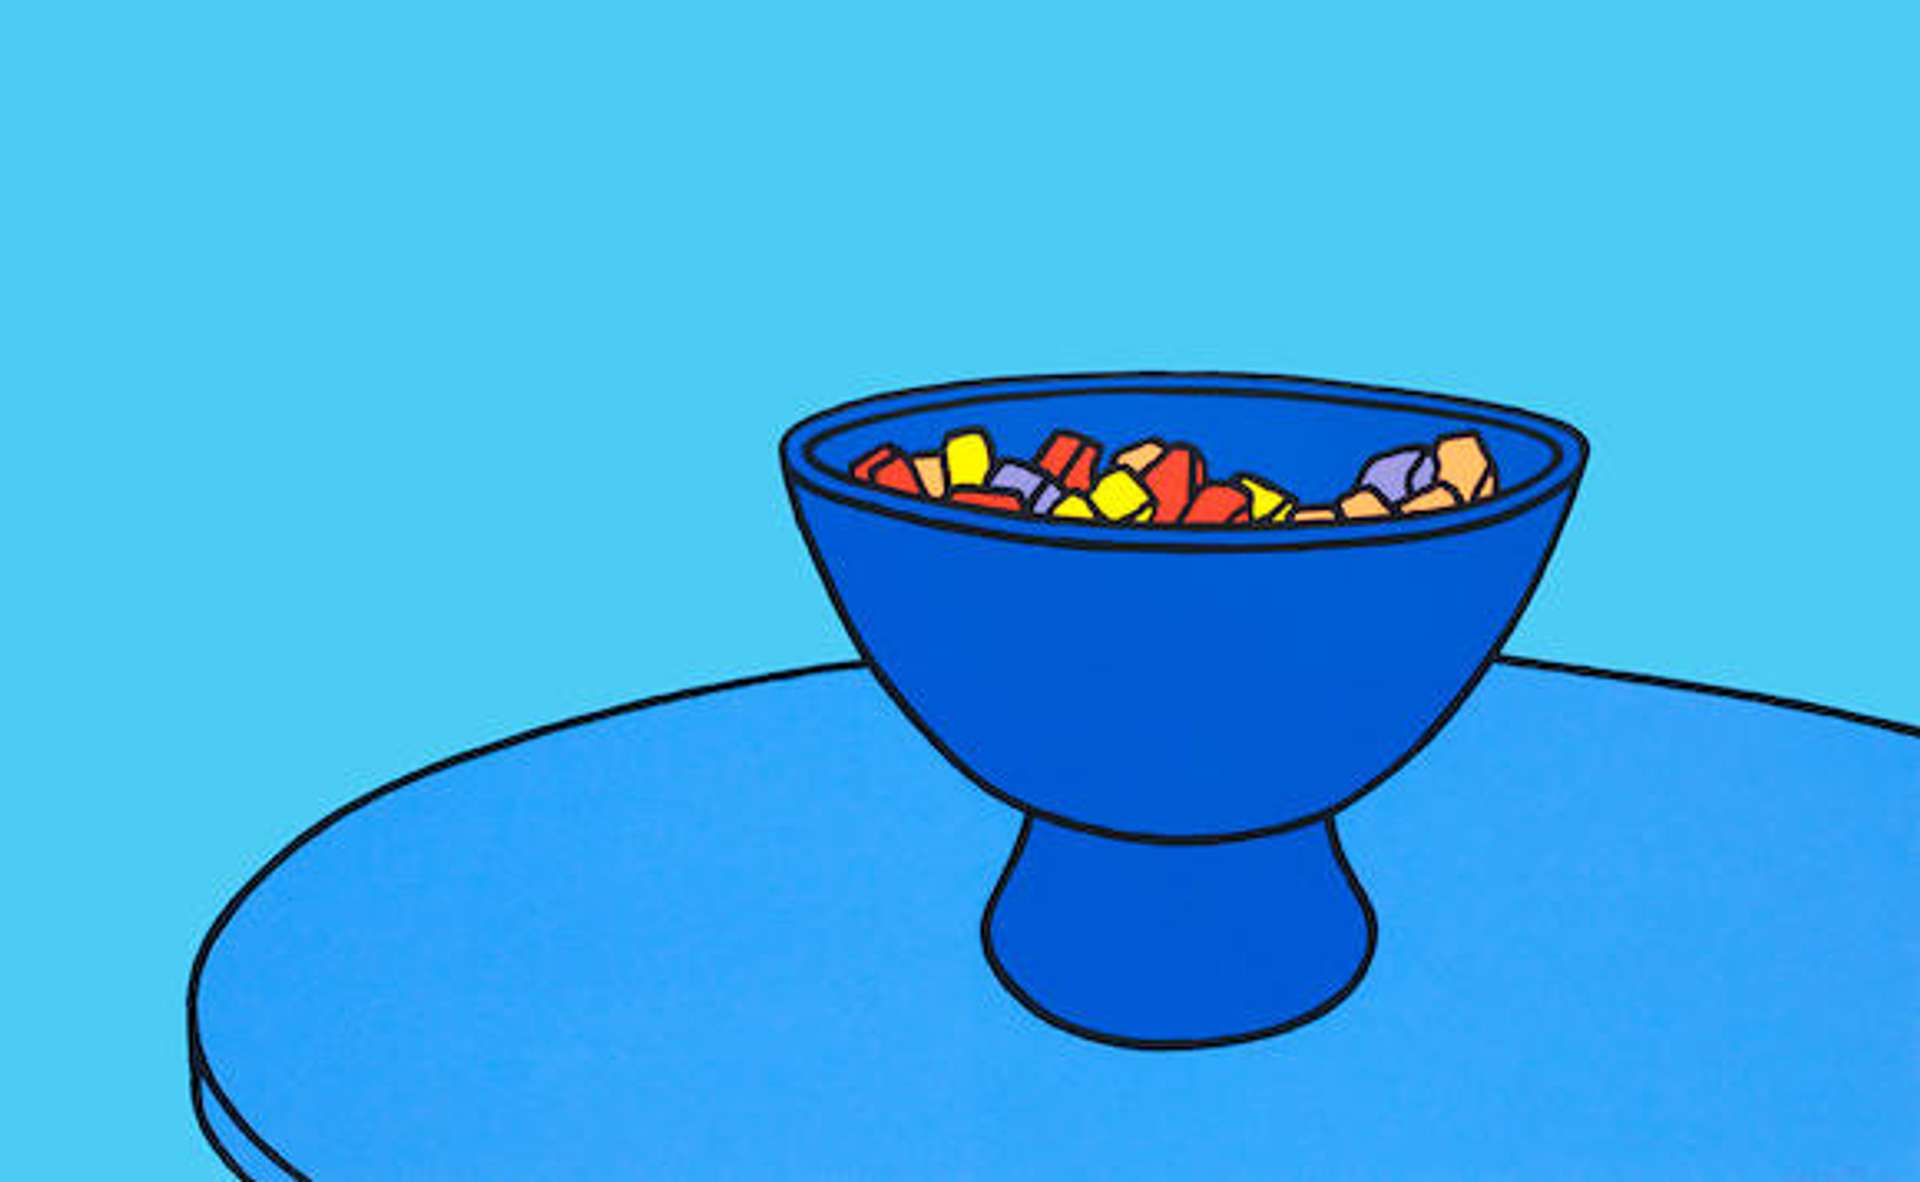  A single blue bowl filled with yellow, red, and purple candies placed on a cropped blue table against a backdrop of different shades of blue.